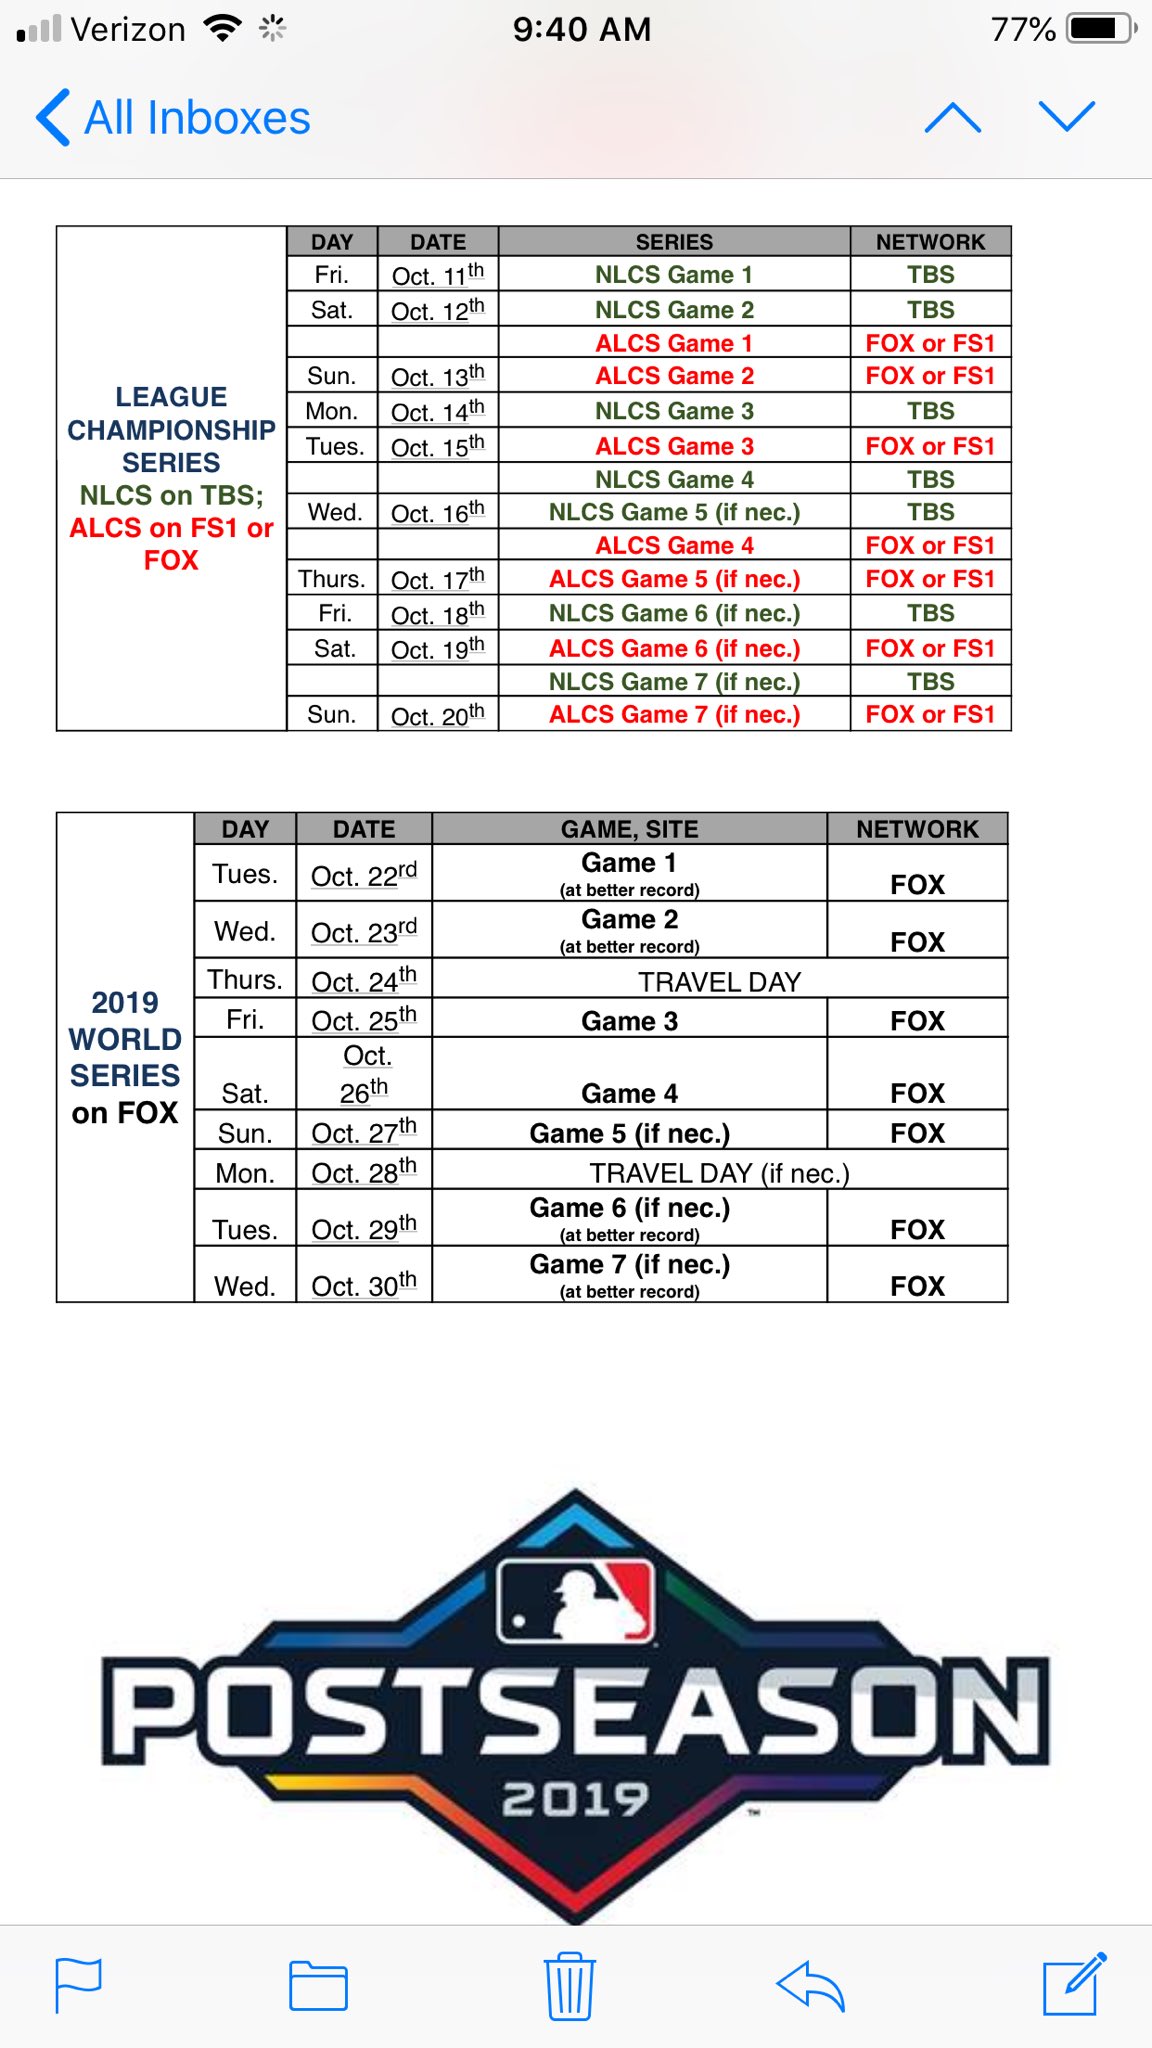 Bob Nightengale on Twitter: "The ALCS-NLCS and World Series schedule for 2019 #MLB Postseason…